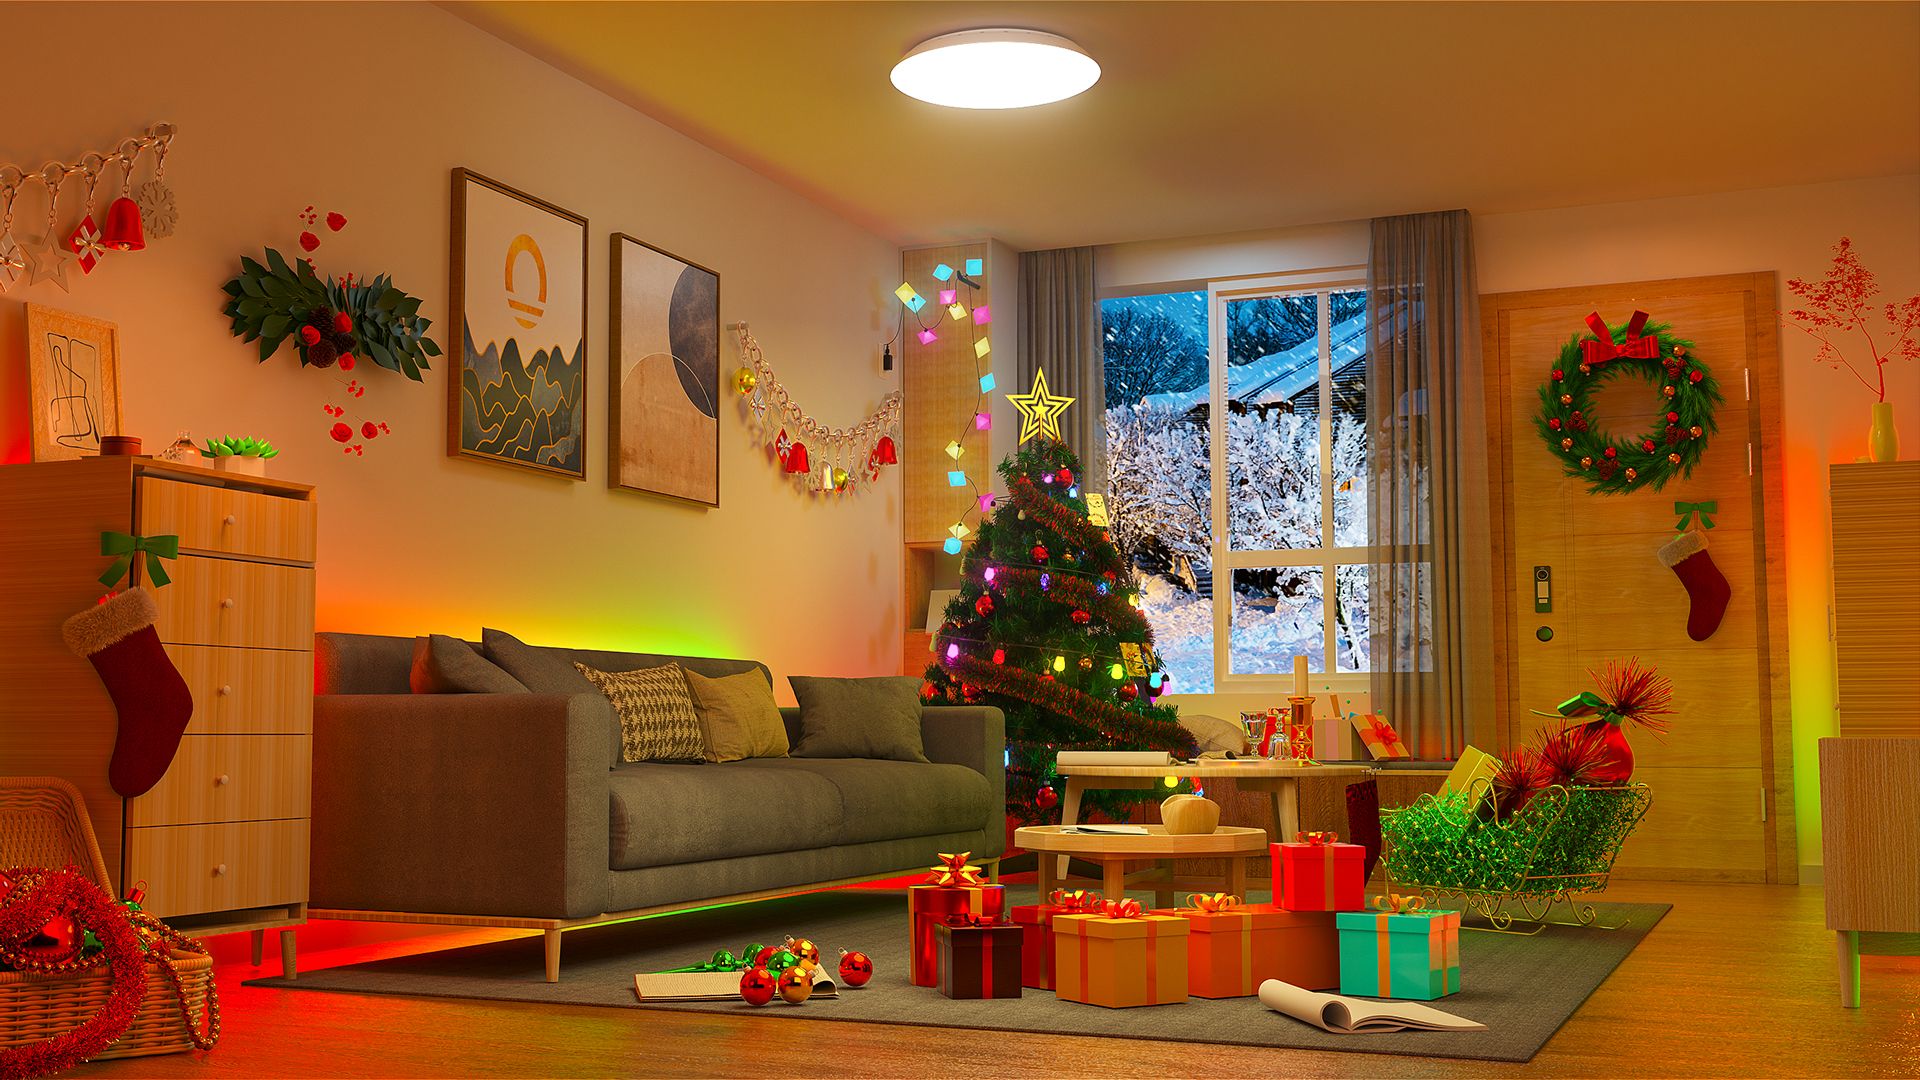 Lumary Smart Ceiling Lights to Decorate Your Home at Christmas